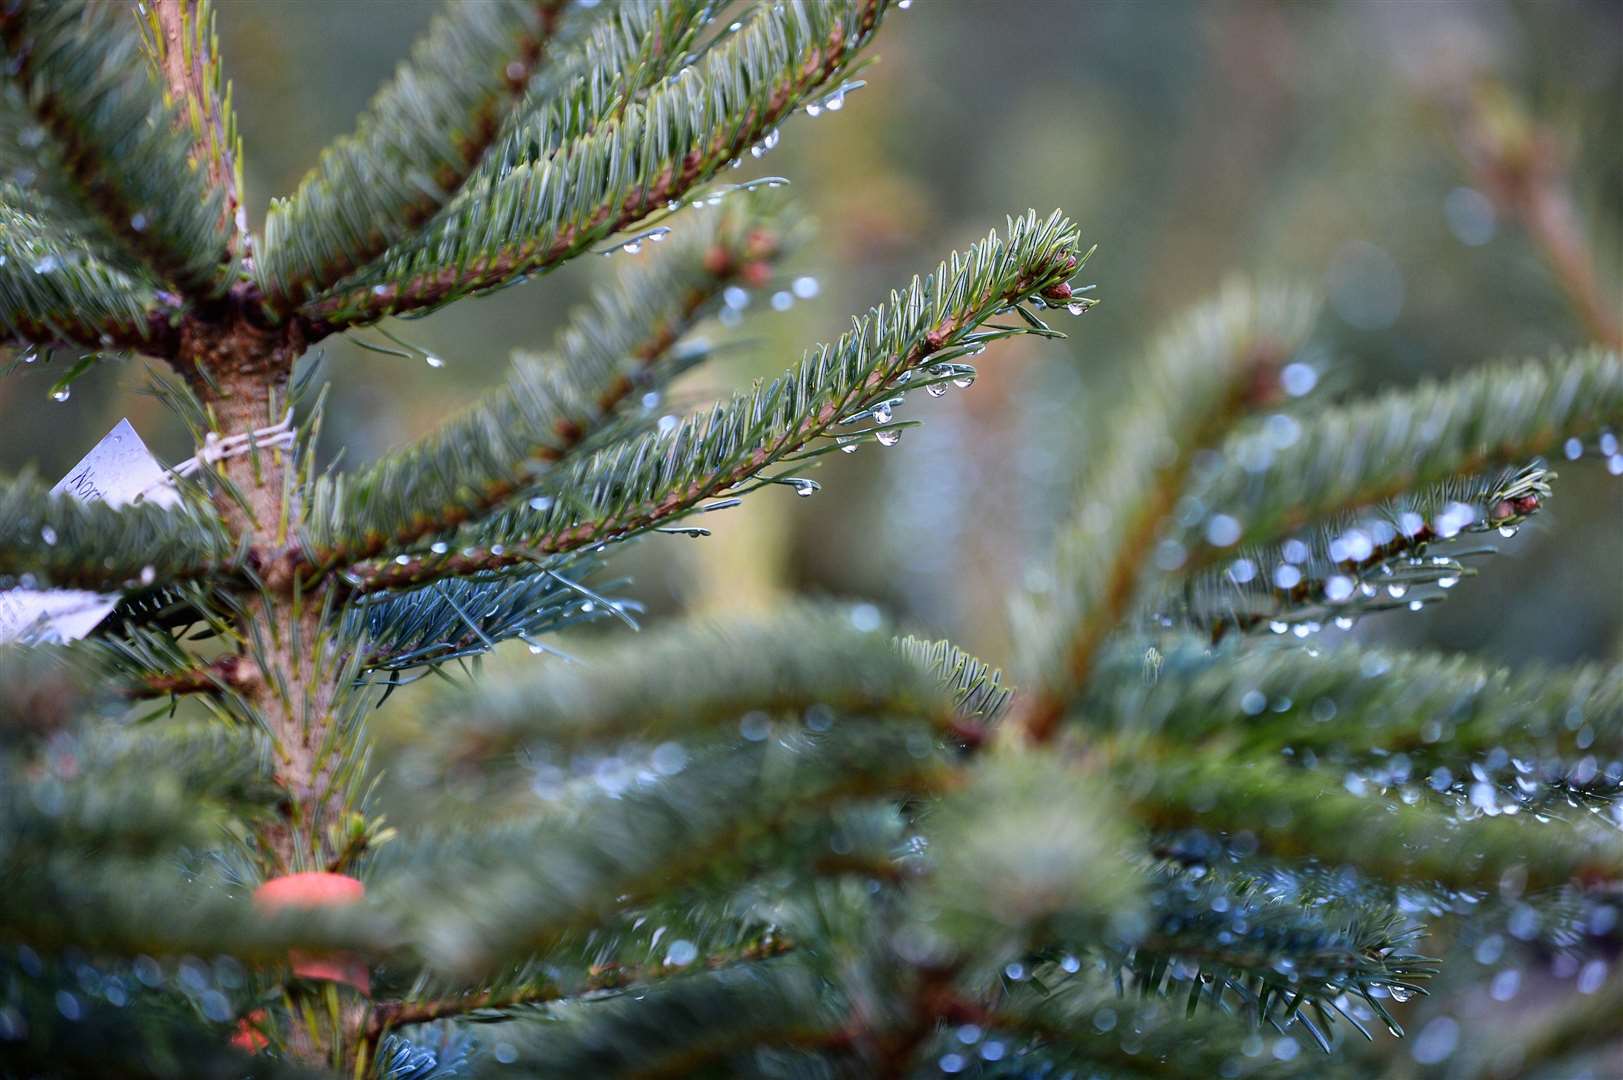 Around seven million real Christmas trees are sold each year